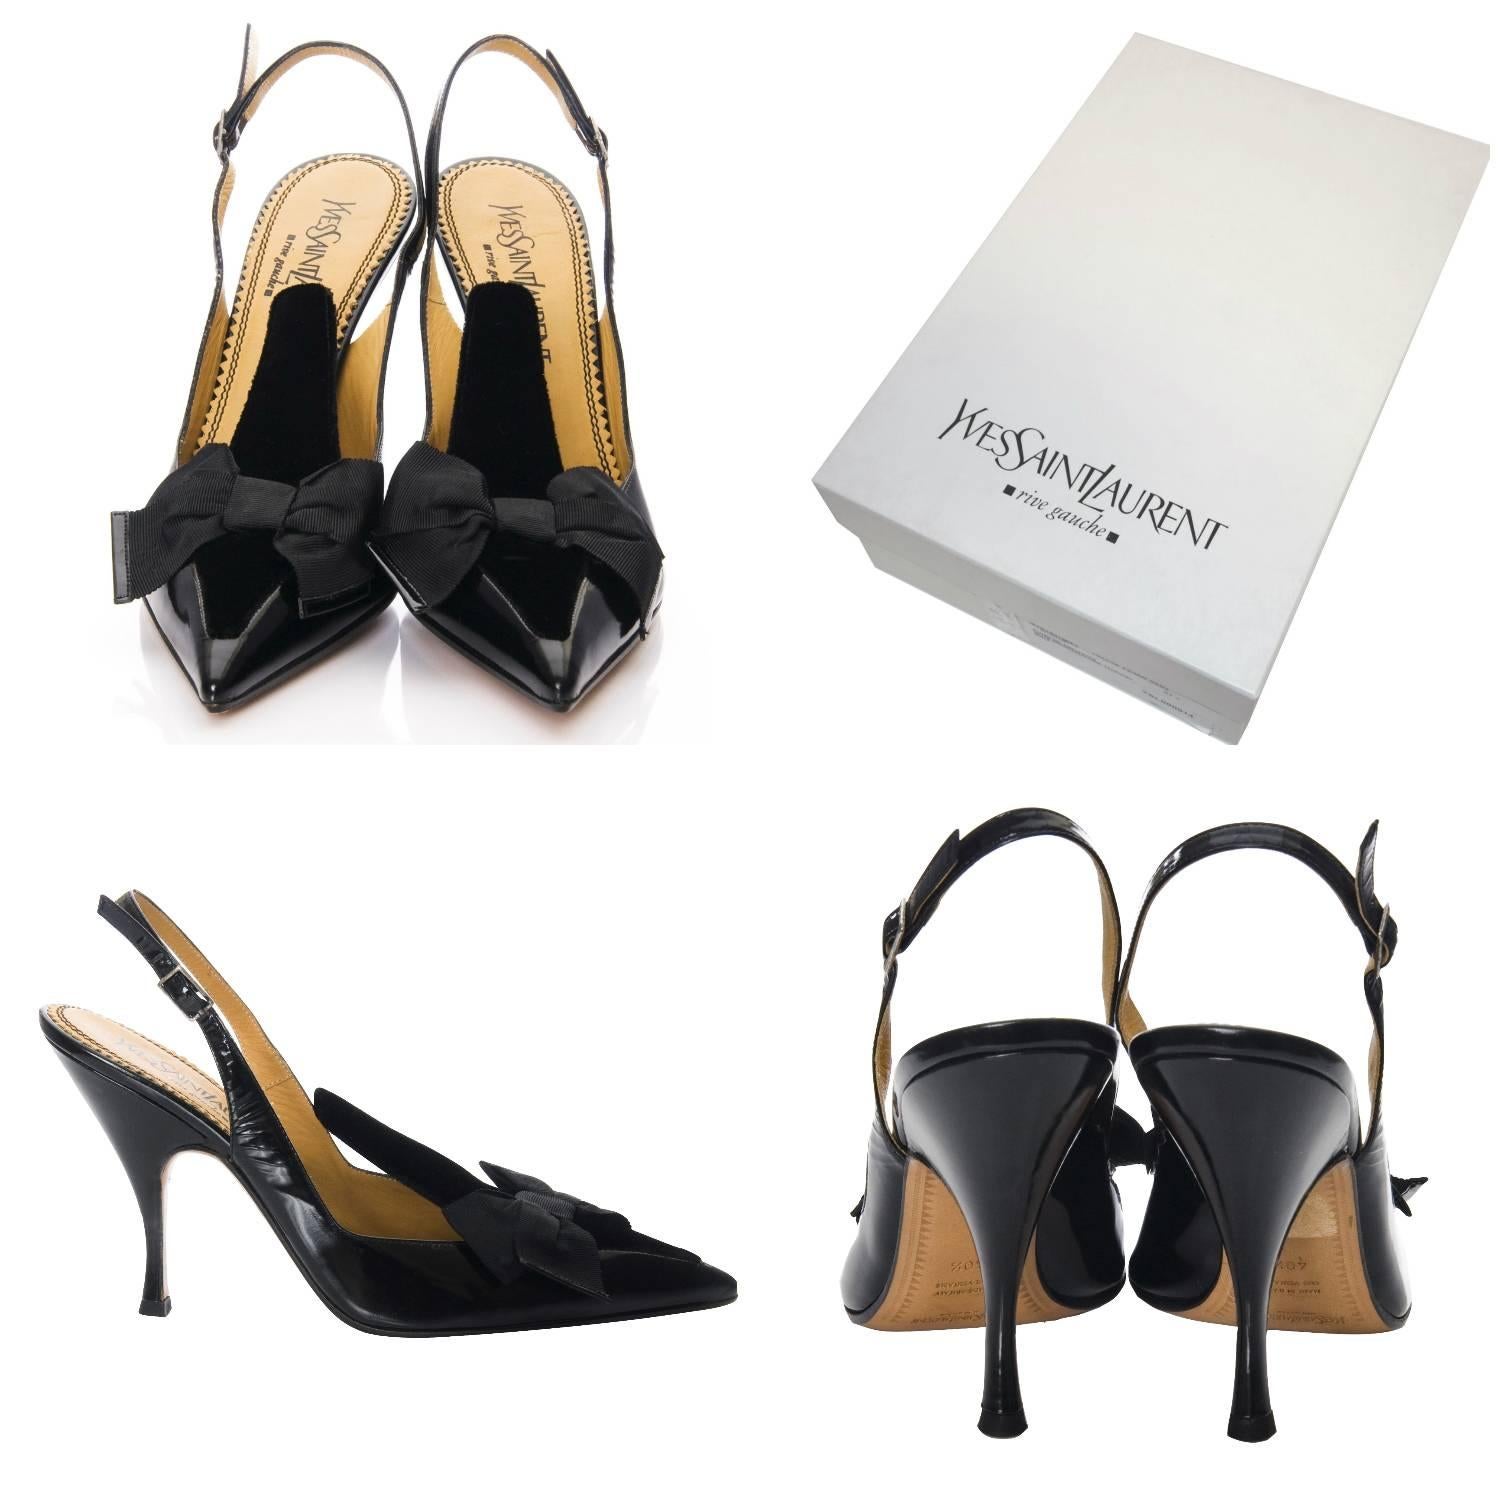 Tom Ford For YSL Heels

Brand New
* Beautiful Velvet Patent Pumps
* Antique Silver Adjustable Ankle Strap
* Size Euro: 40.5
* Pointed Toe
* Black Patent Leather 
* Bow Detail at Toe
* Black Velvet Accent 
* 4